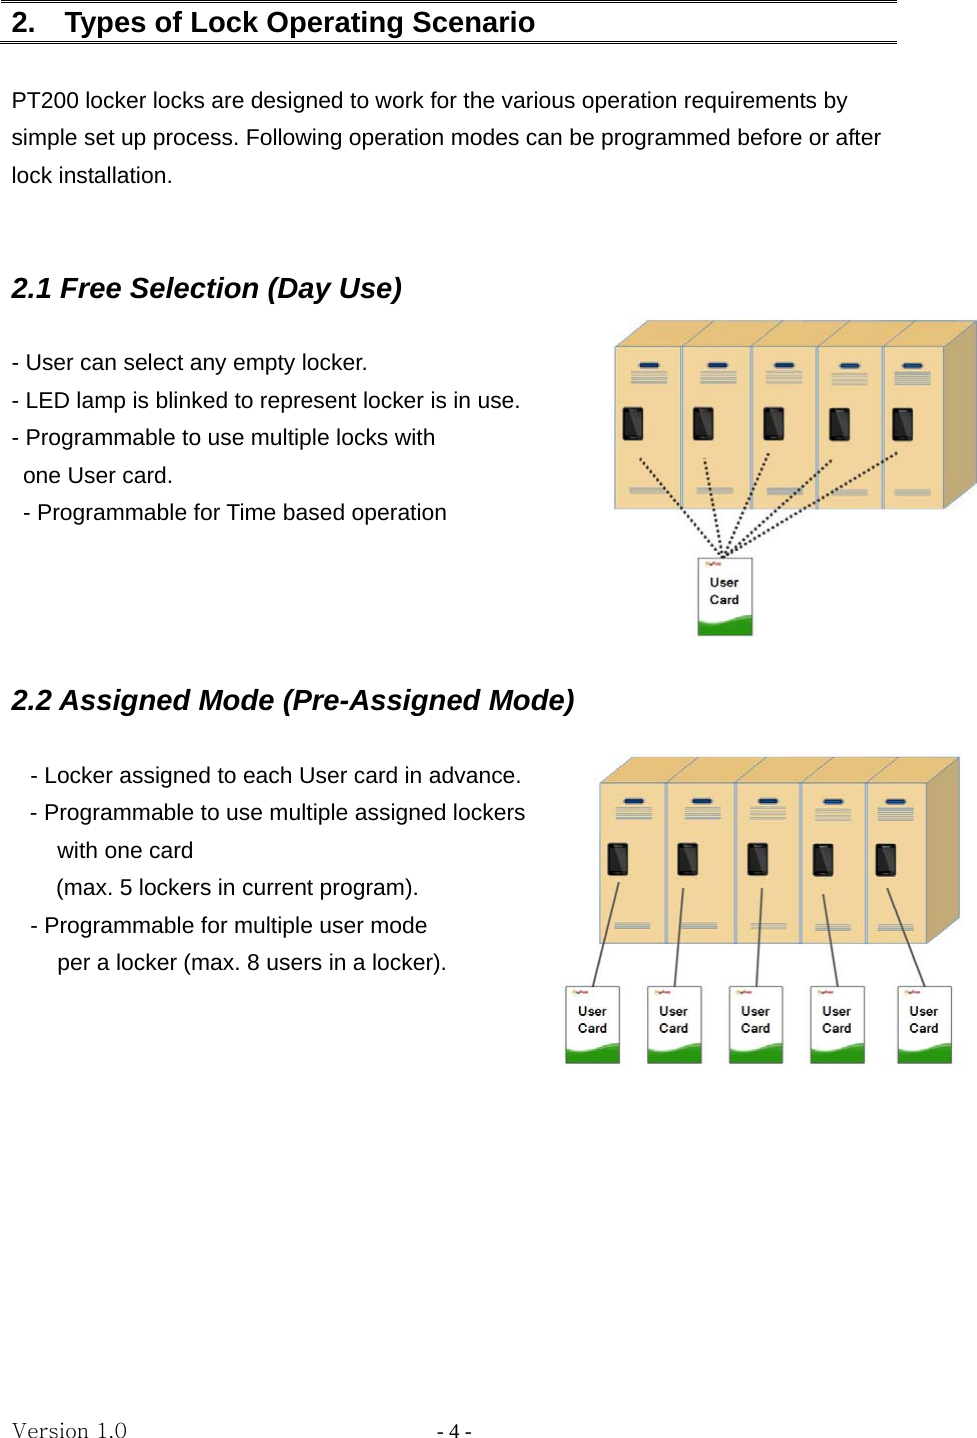 Version 1.0                - 4 - 2.    Types of Lock Operating Scenario  PT200 locker locks are designed to work for the various operation requirements by simple set up process. Following operation modes can be programmed before or after lock installation.   2.1 Free Selection (Day Use)   - User can select any empty locker. - LED lamp is blinked to represent locker is in use. - Programmable to use multiple locks with     one User card.   - Programmable for Time based operation       2.2 Assigned Mode (Pre-Assigned Mode)  - Locker assigned to each User card in advance. - Programmable to use multiple assigned lockers   with one card   (max. 5 lockers in current program). - Programmable for multiple user mode   per a locker (max. 8 users in a locker).          